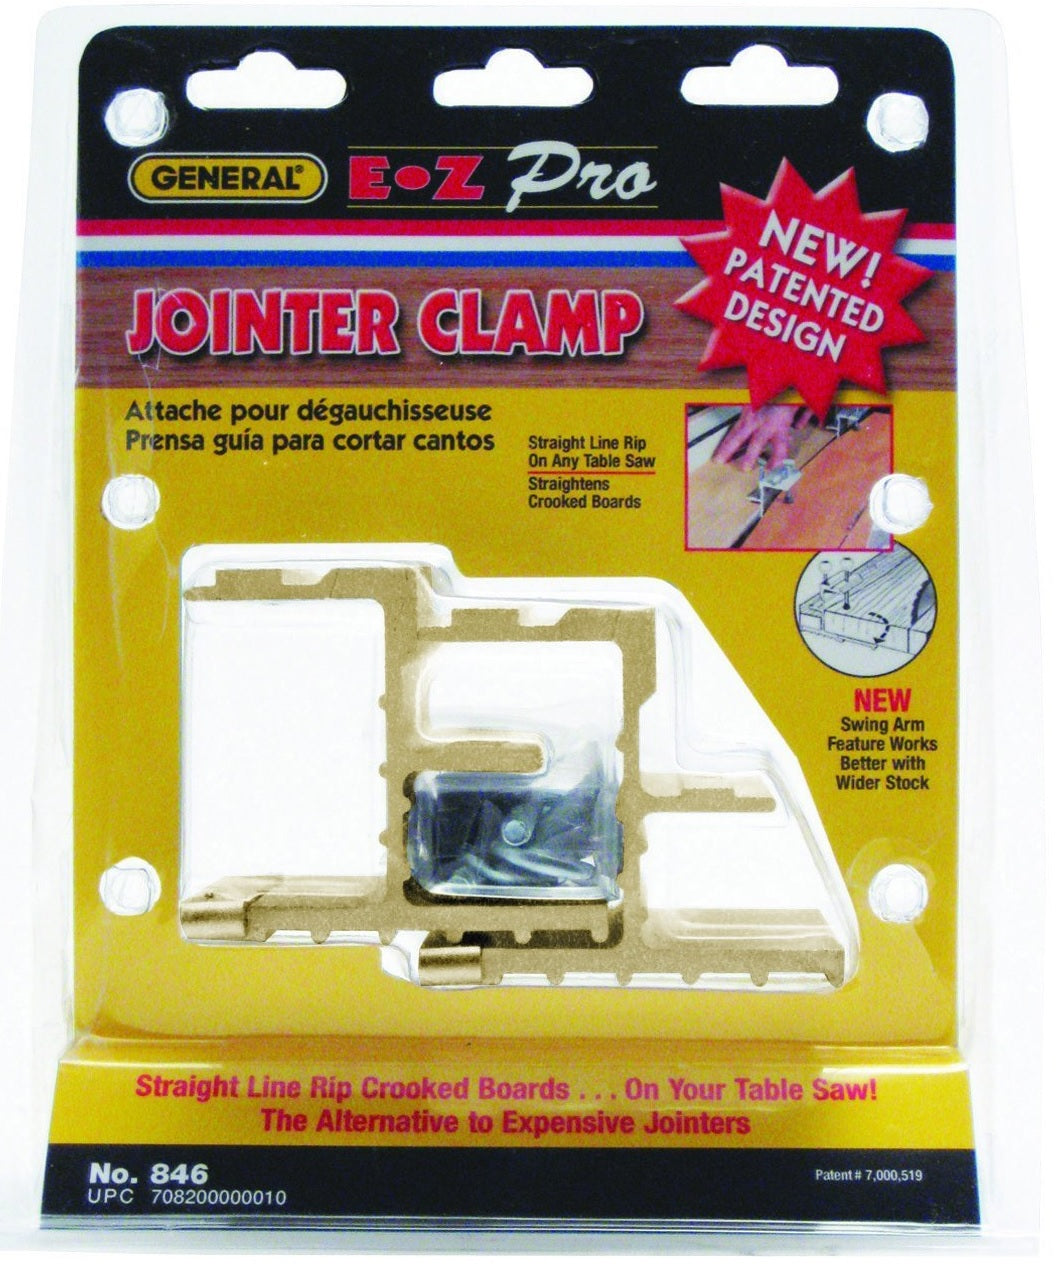 Buy jointer clamp - Online store for power tools & accessories, power cutting accessories in USA, on sale, low price, discount deals, coupon code